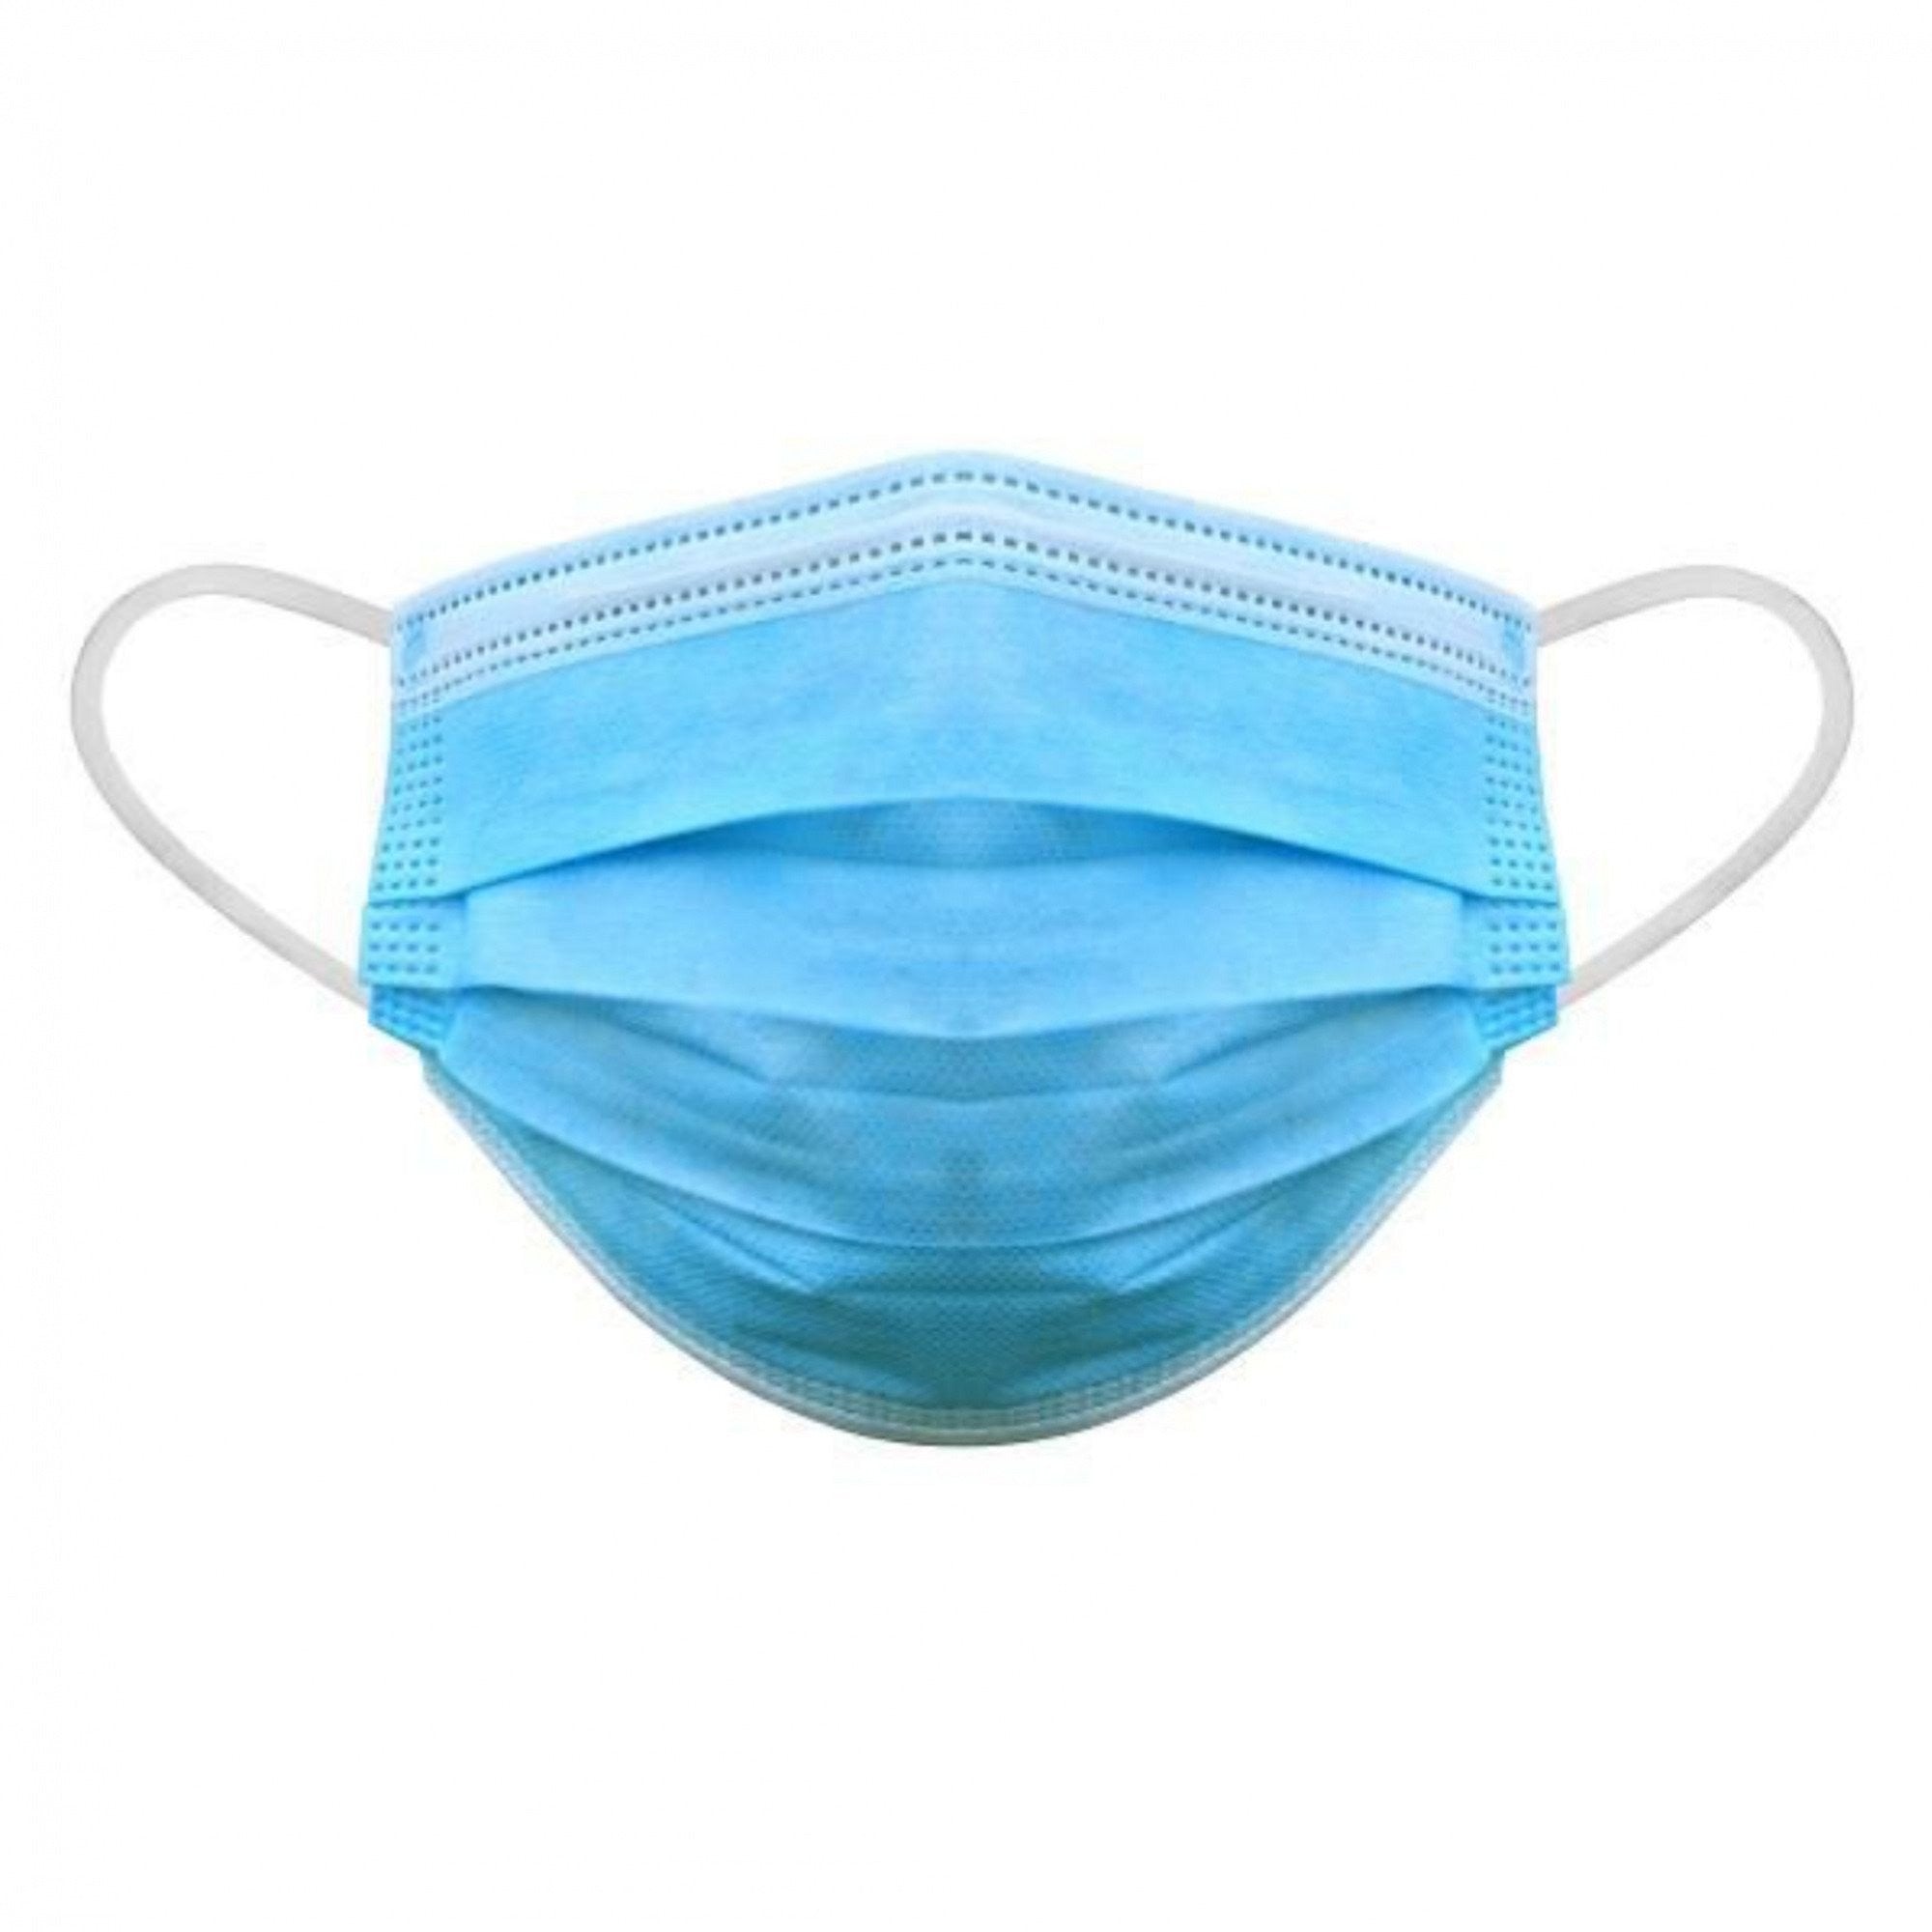 Protective Disposable Face Mask, 3-Ply (1 Mask)